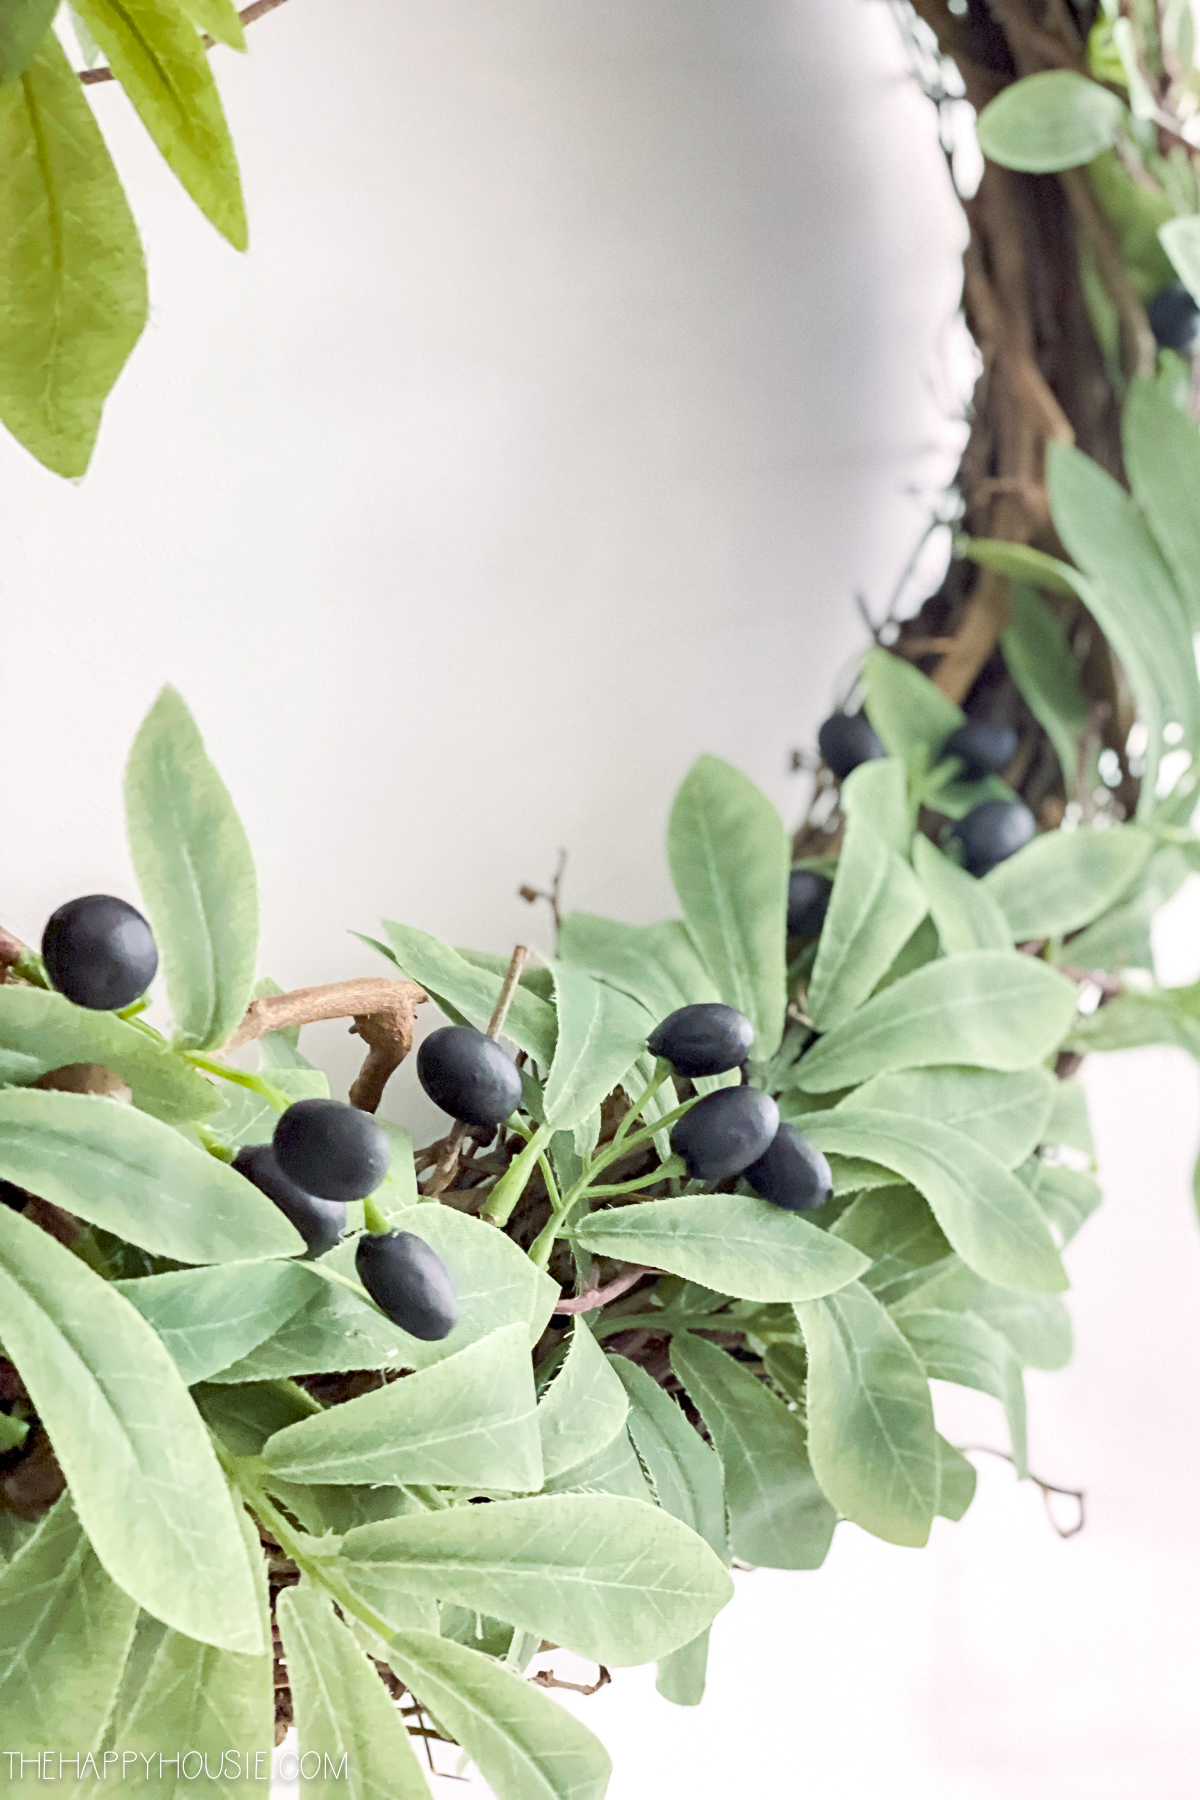 The olive wreath with green leaves and black olives.